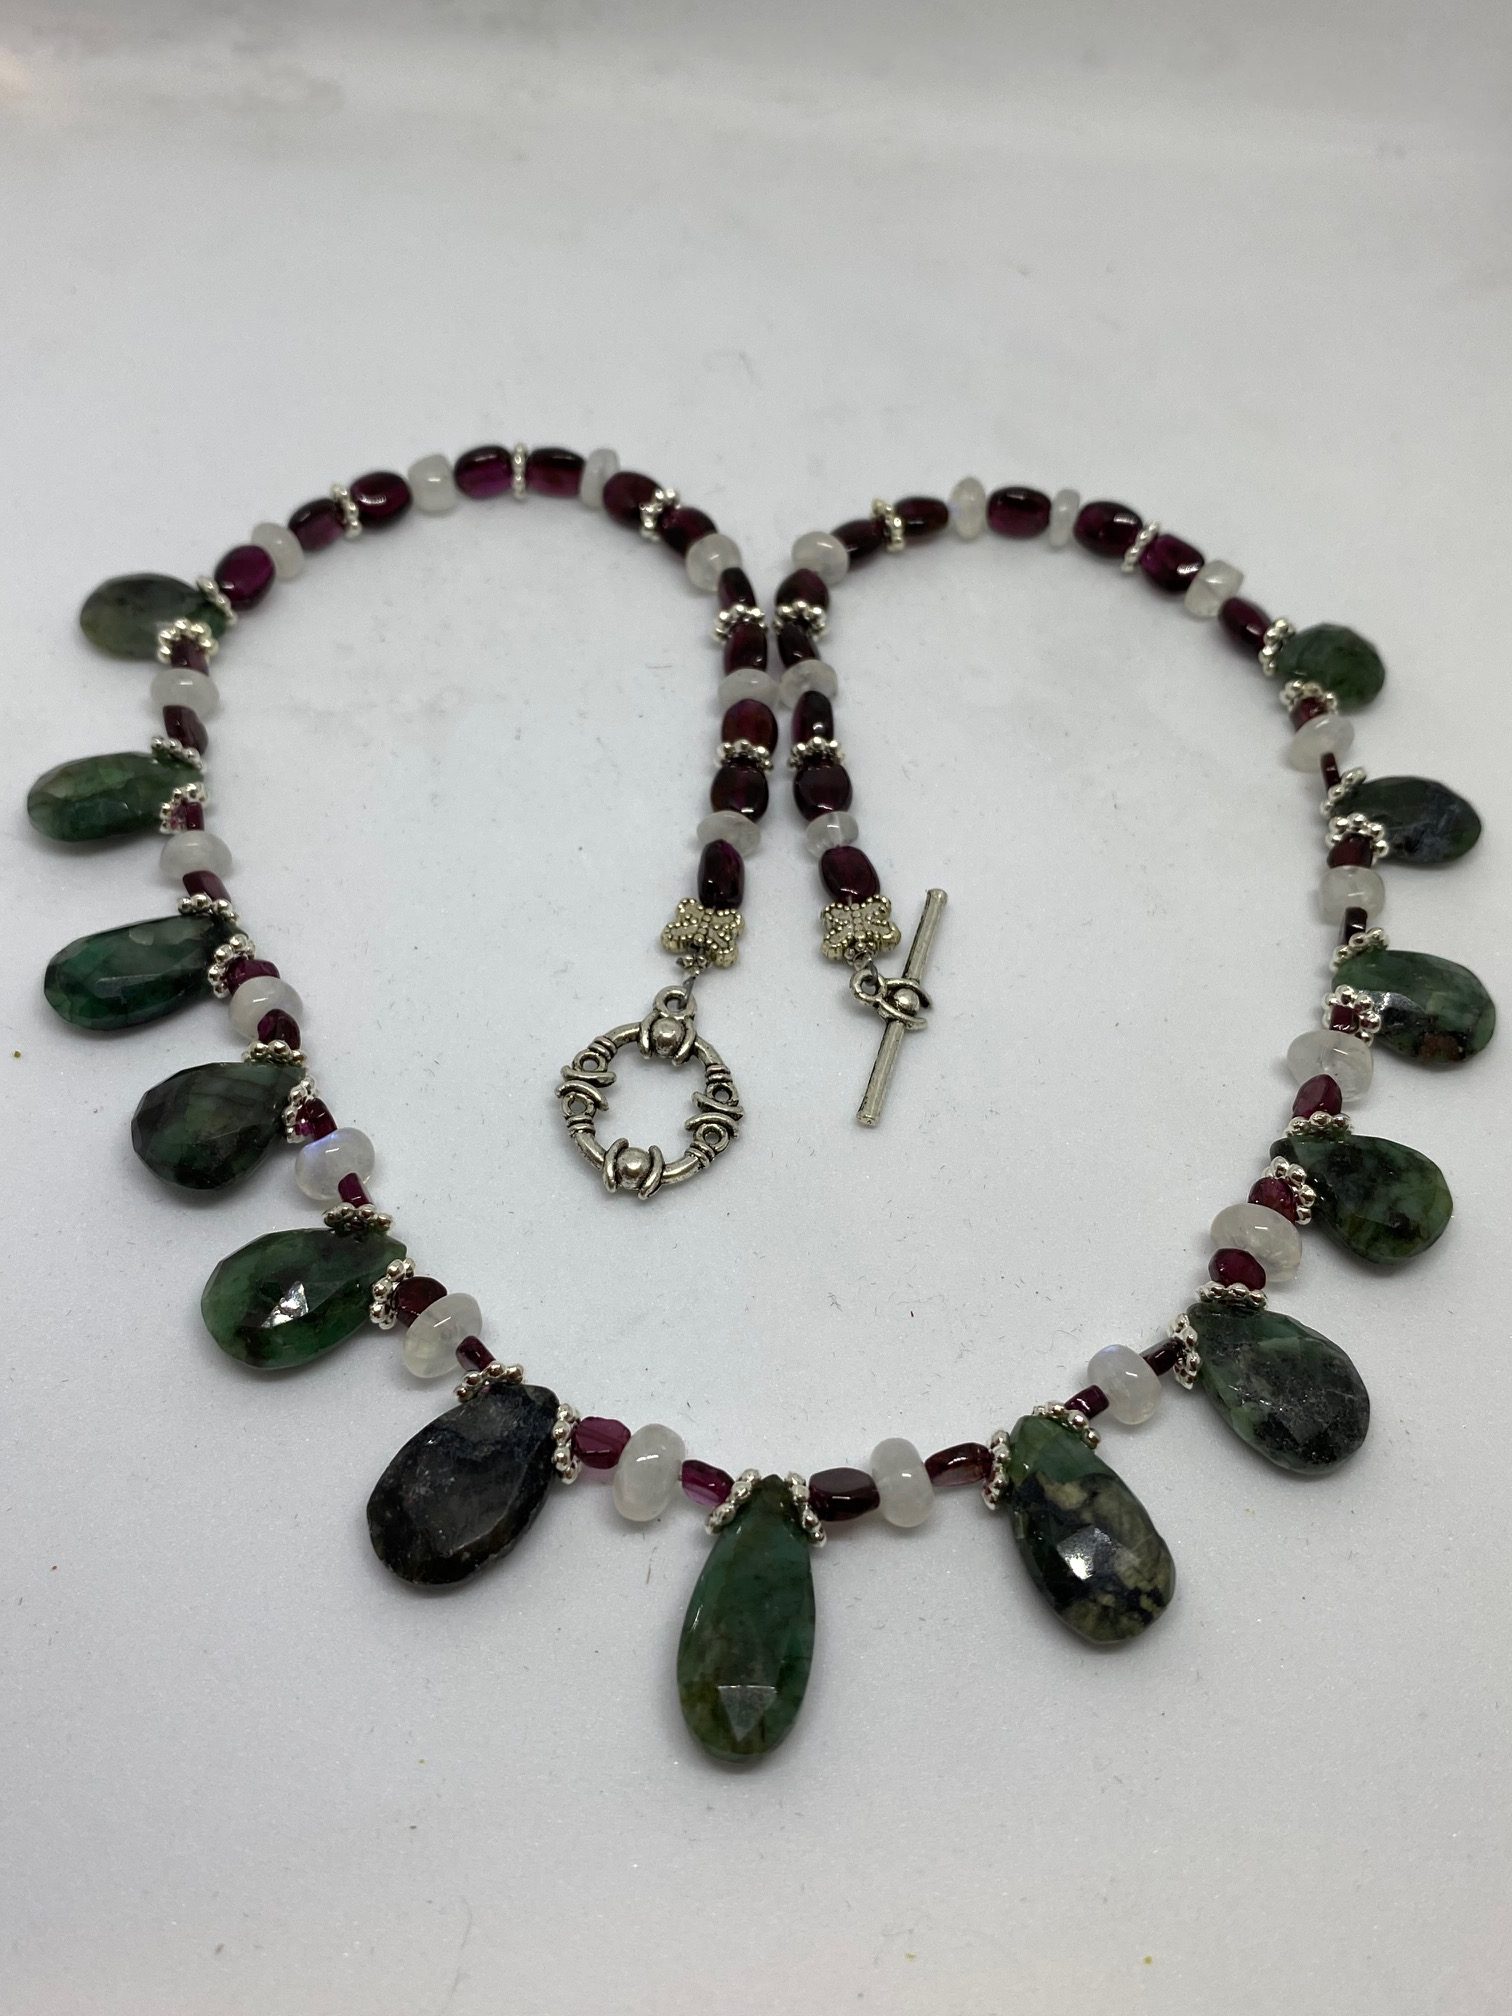 Emerald, Moonstone, and Garnet Necklace This necklace supports Success, Good Fortune, and Protection.